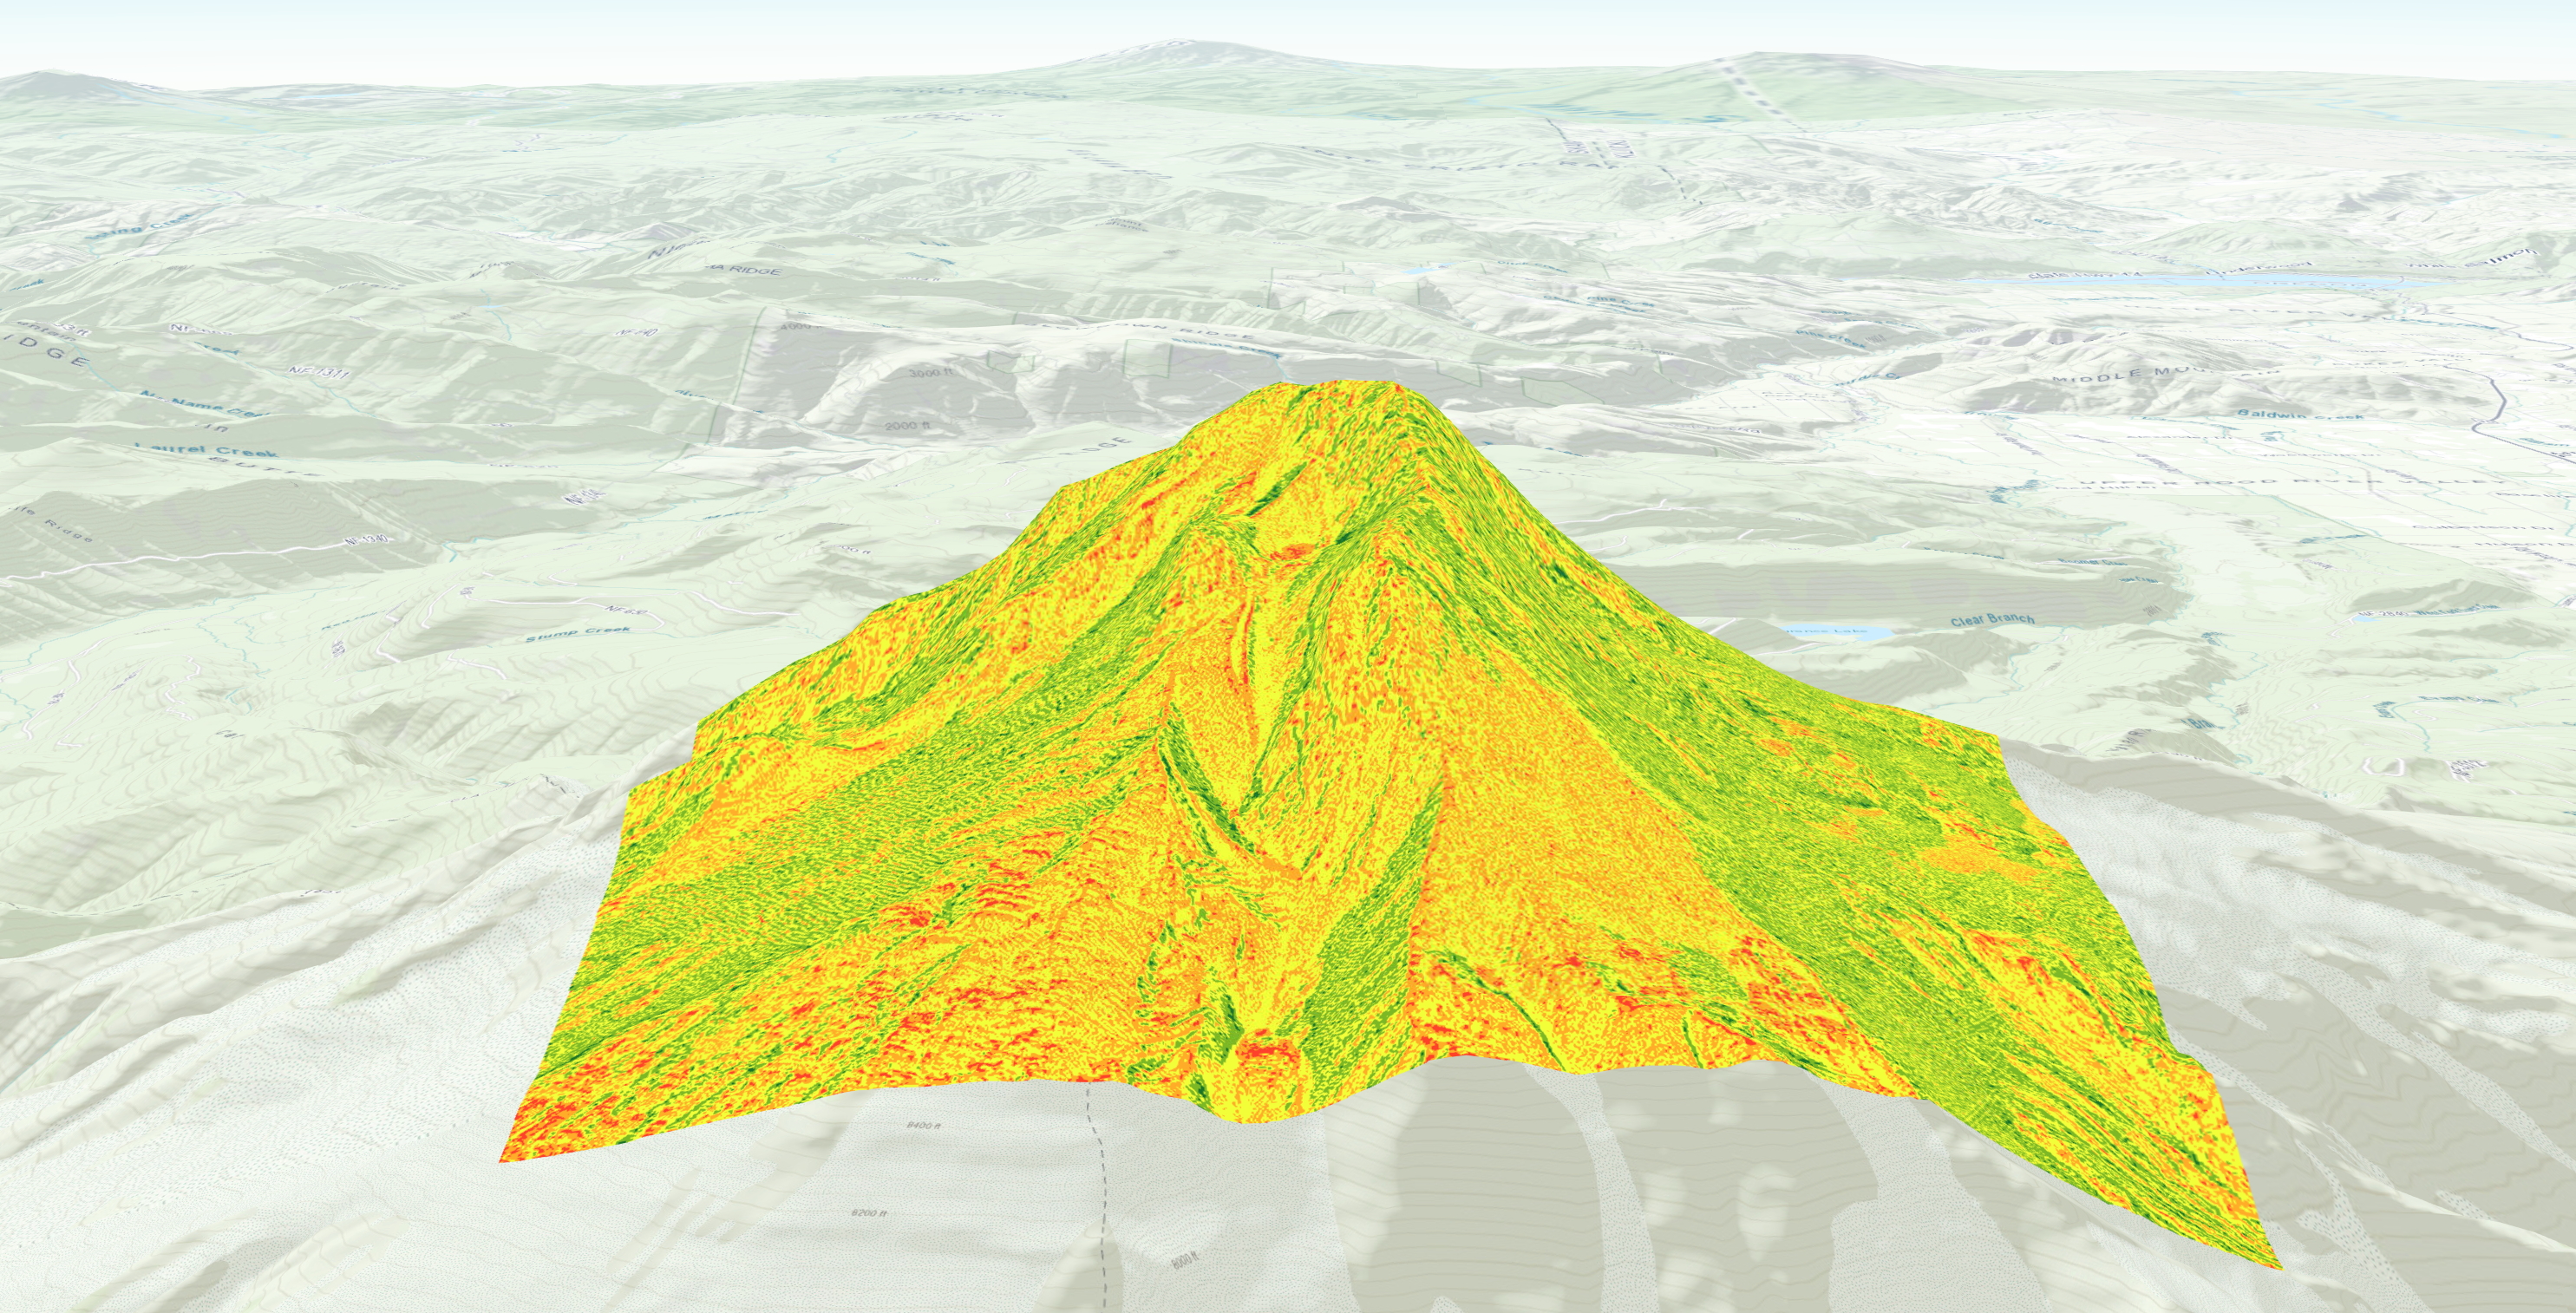 Lab 6: 3D Data Visualization of Avalanche Susceptibility of Mt. Hood, OR.